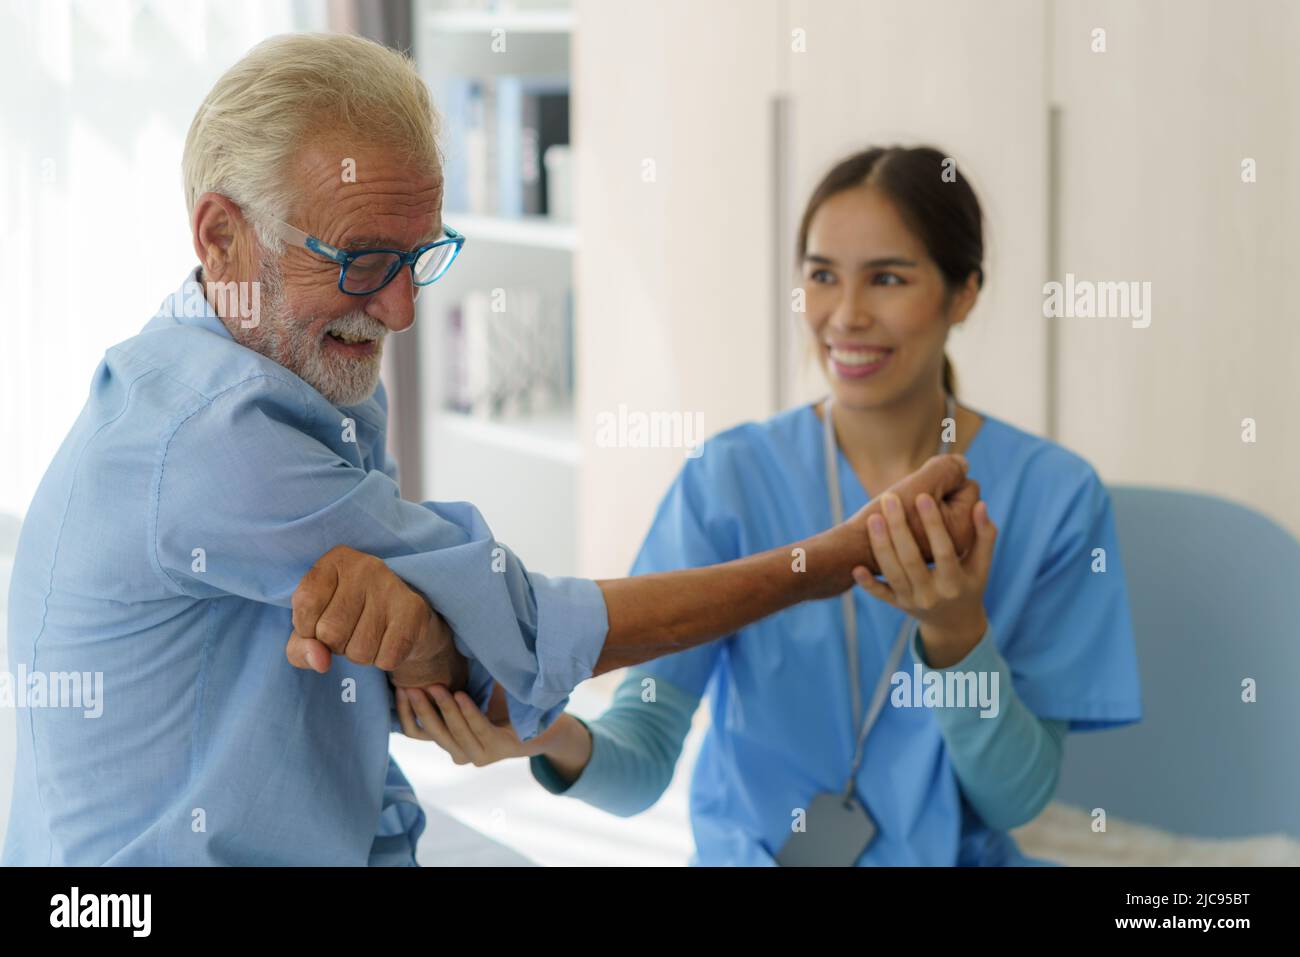 Senior man physiotherapy exercises with Asian woman caregiver or nurse physiotherapist in uniform helping aged male patient at home. Stock Photo